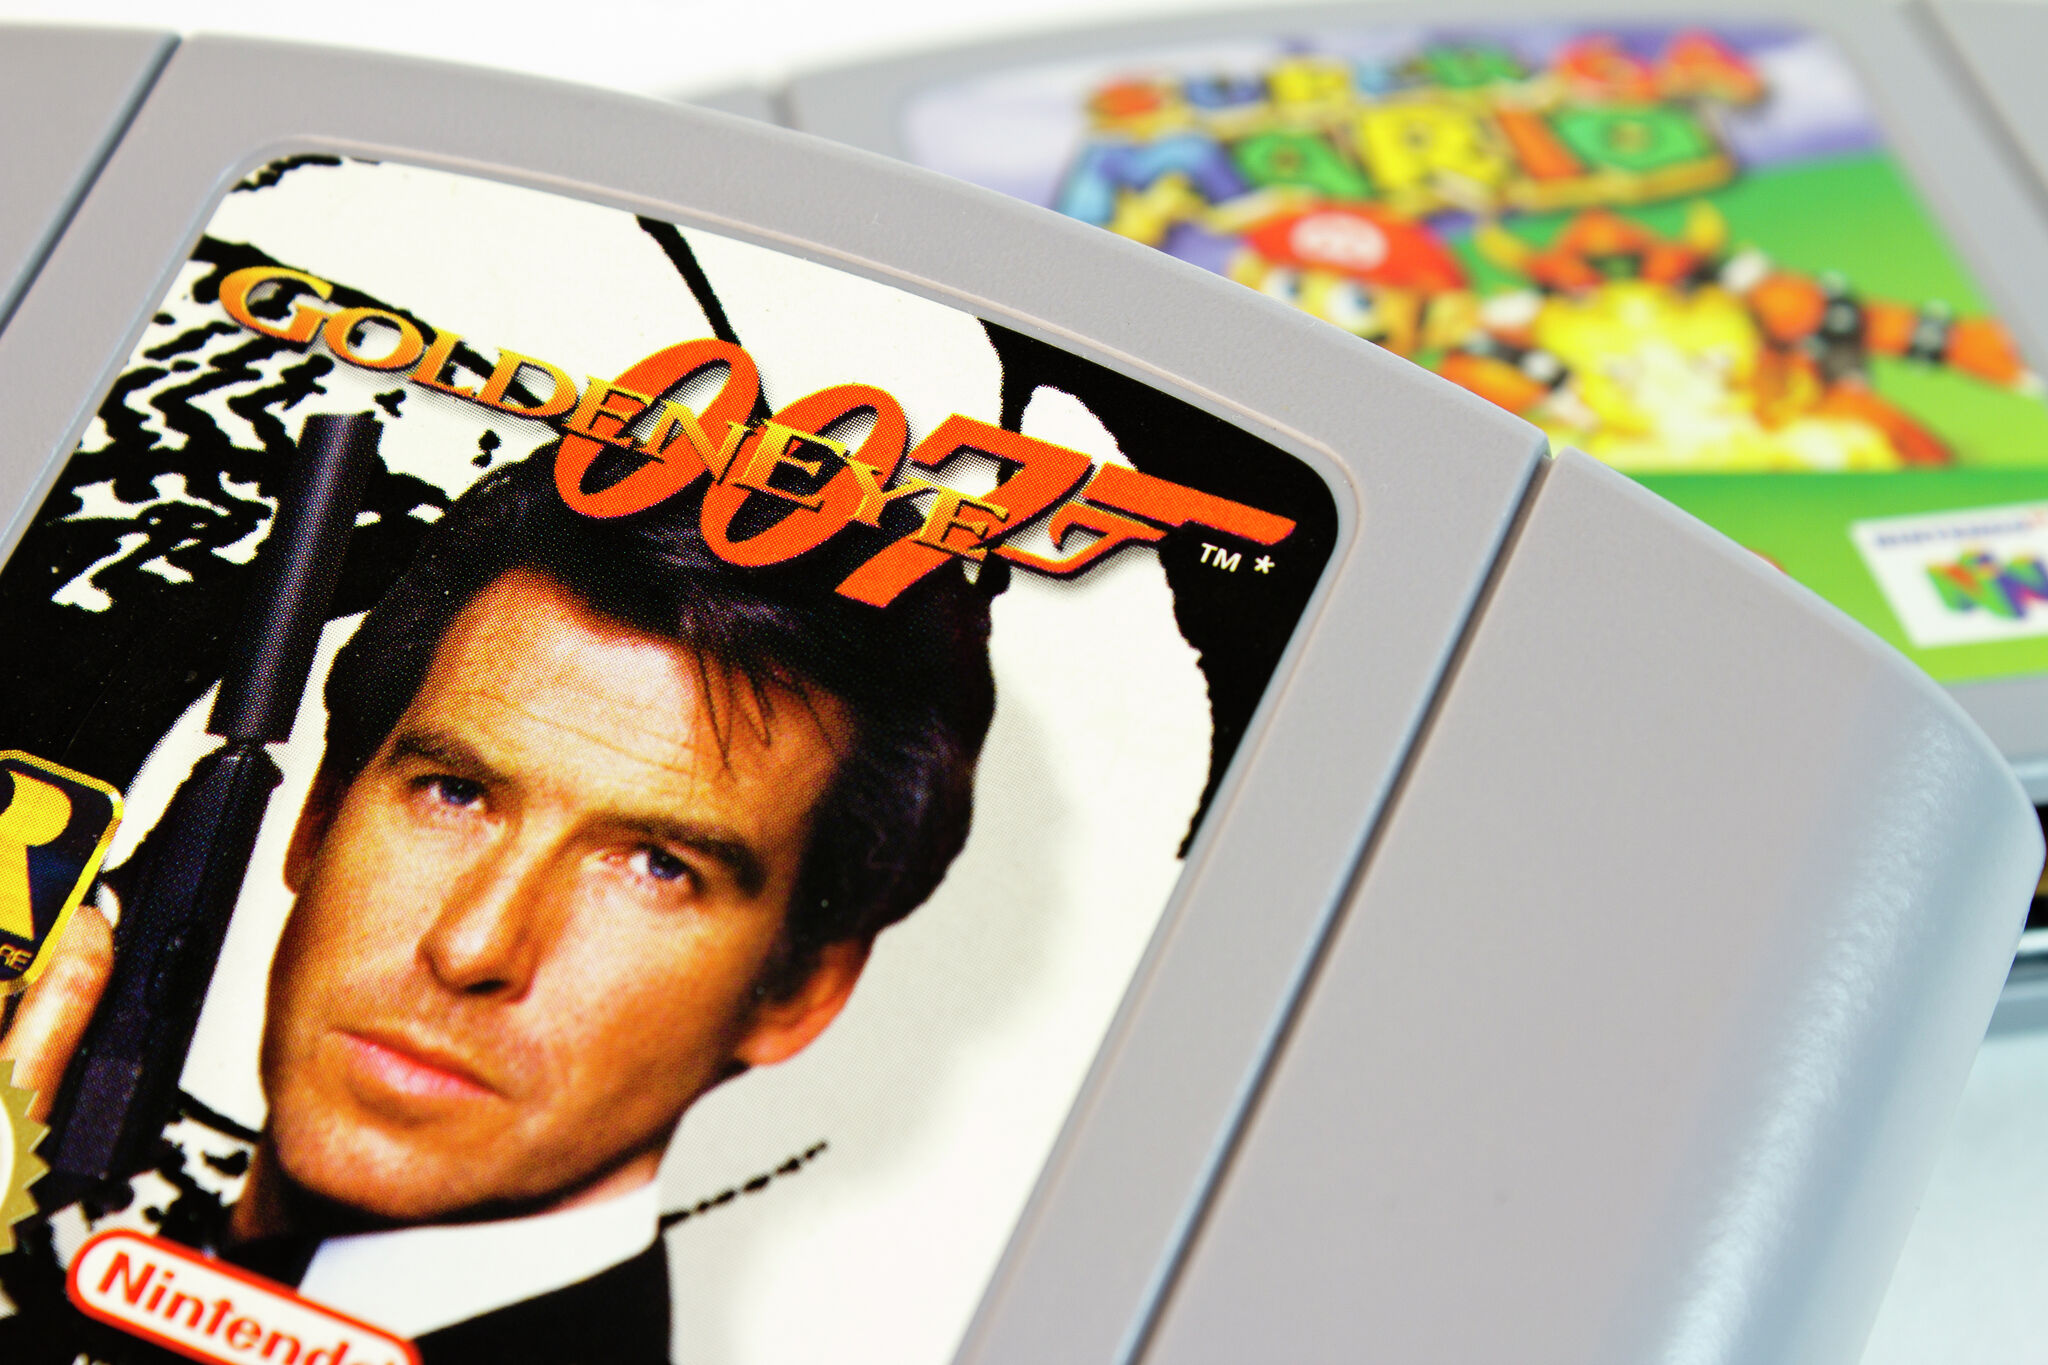 GoldenEye 007 Remaster hits Switch and Xbox this week